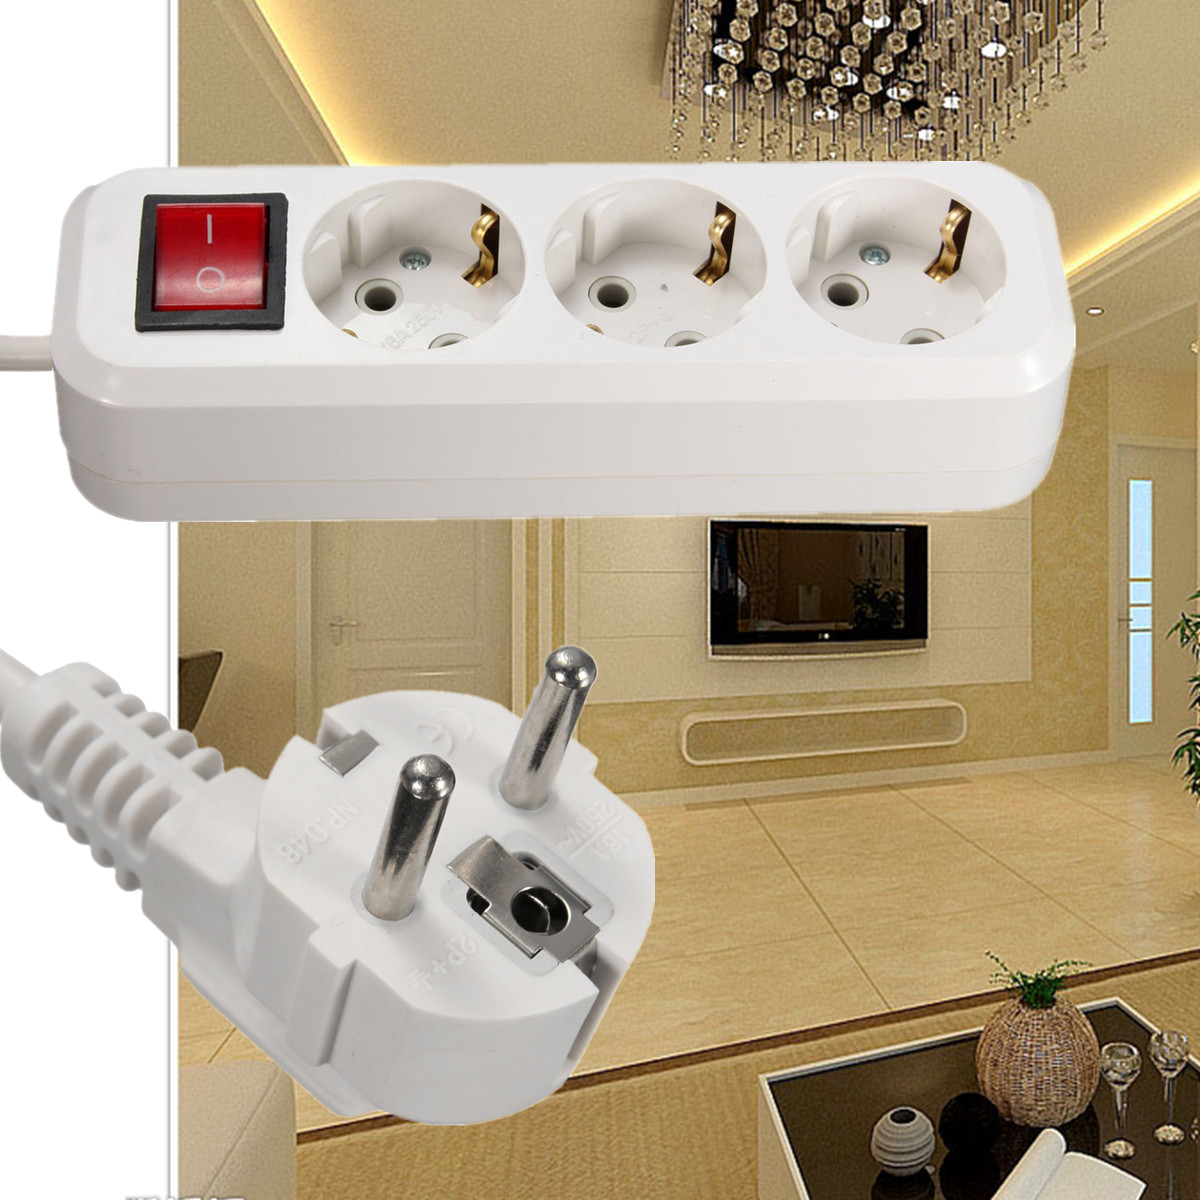 

EU Plug10A 250V 3 Outlet Power Extension Cable Wall Socket Mains Lead Plug Strip Adapter